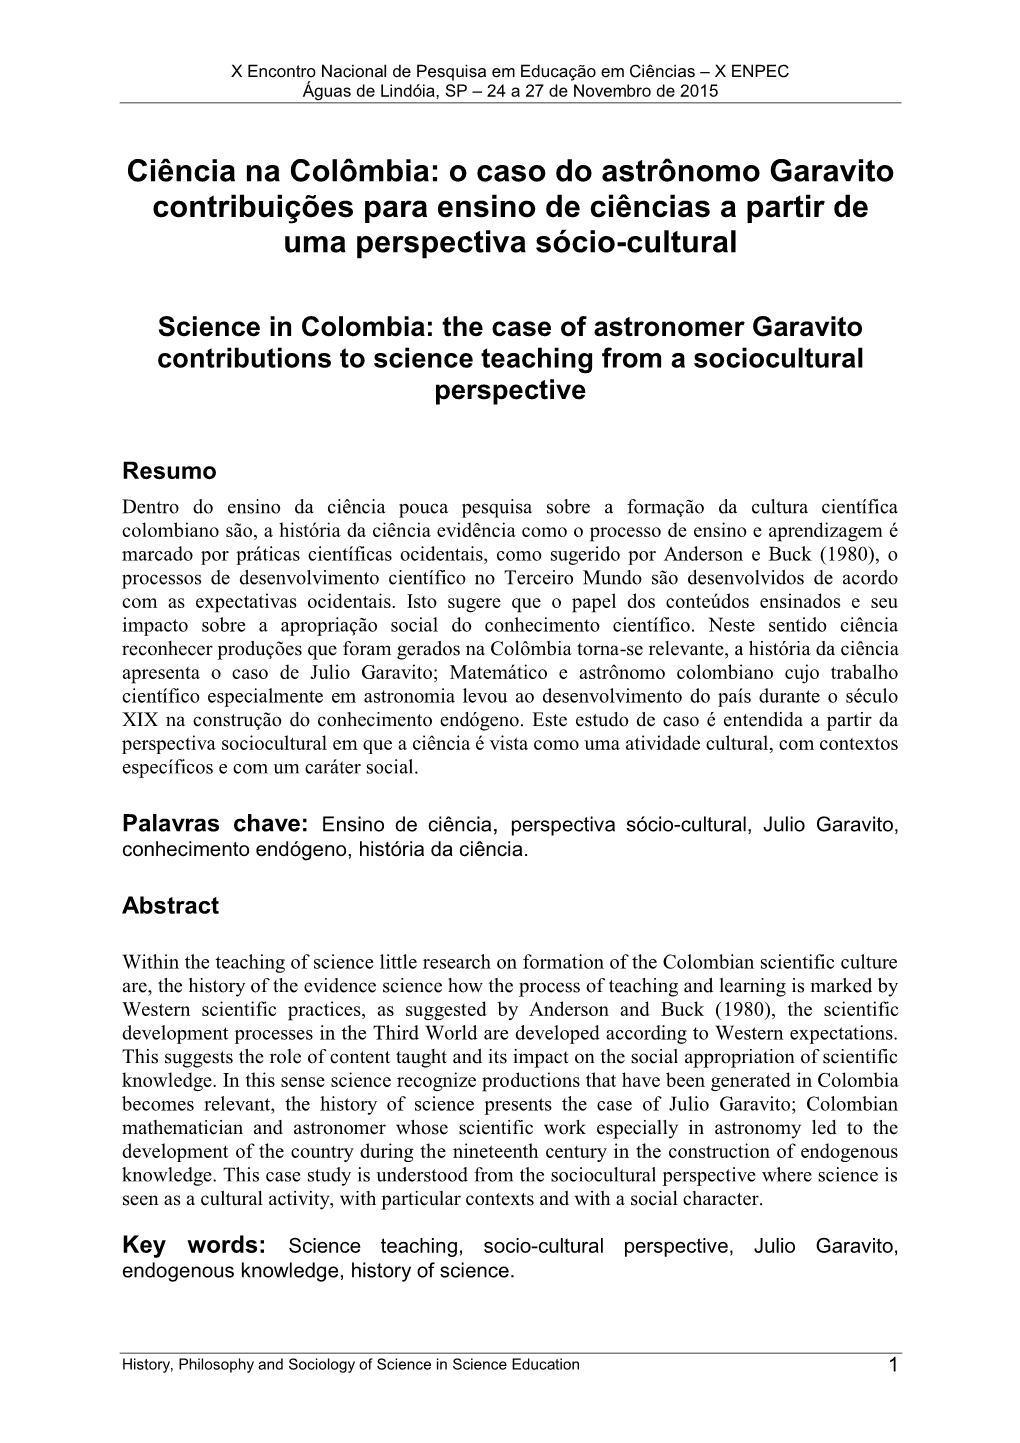 The Case of Astronomer Garavito Contributions to Science Teaching from a Sociocultural Perspective